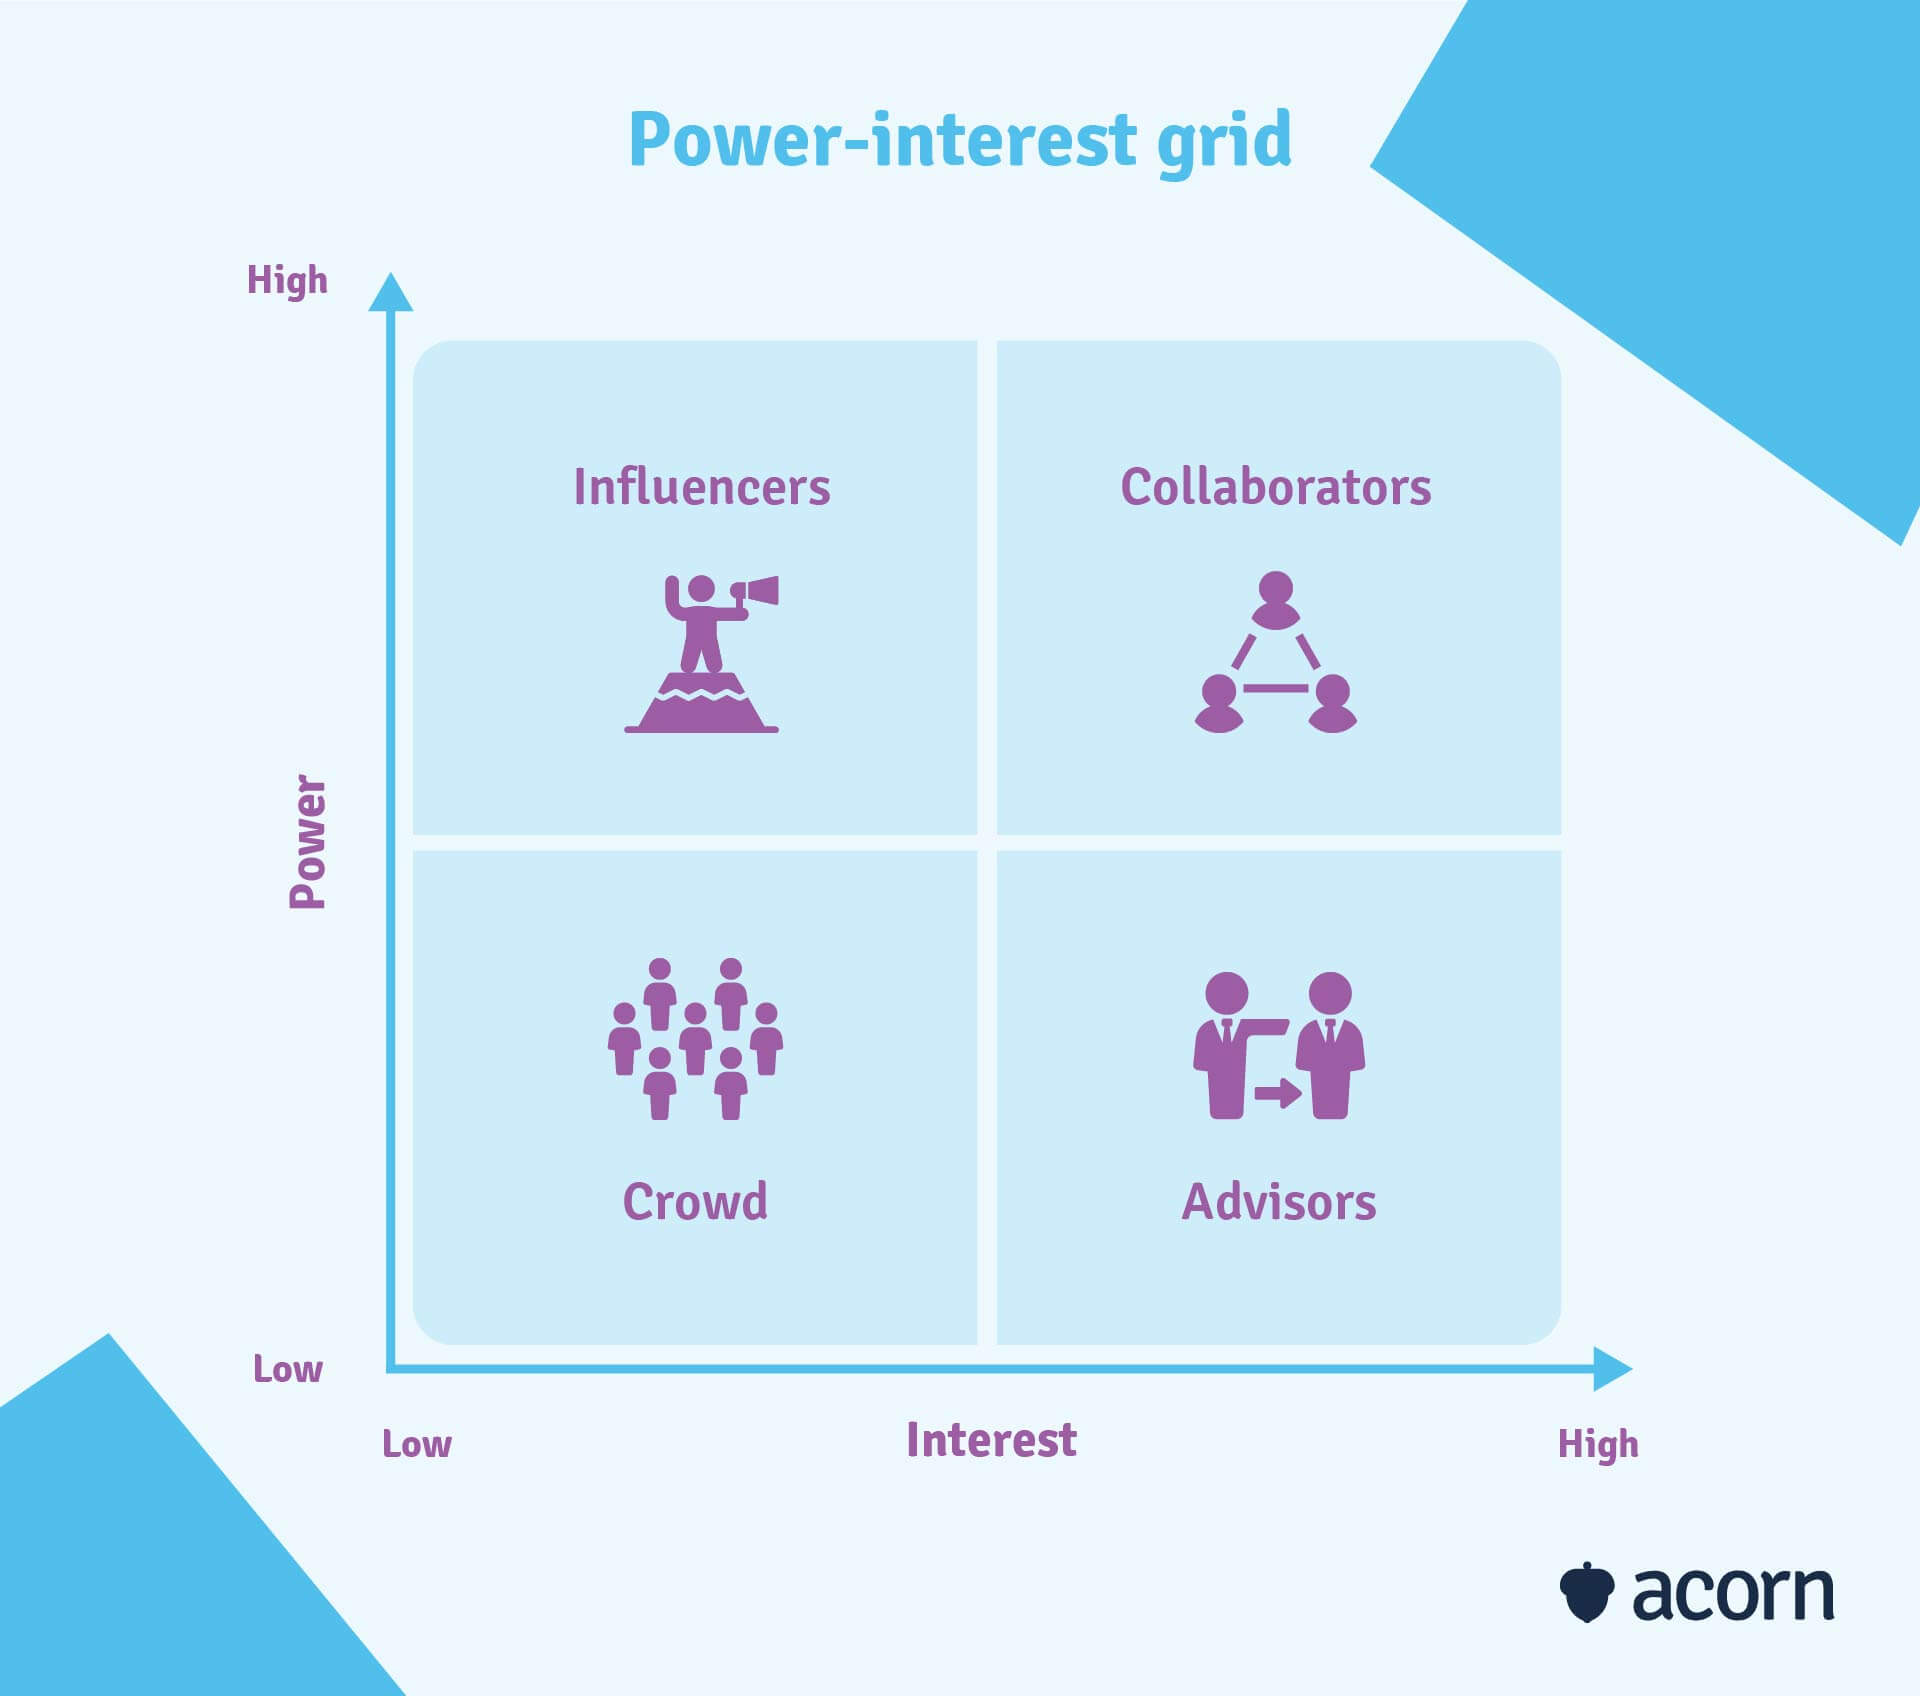 The power-interest grid method of classifying stakeholders